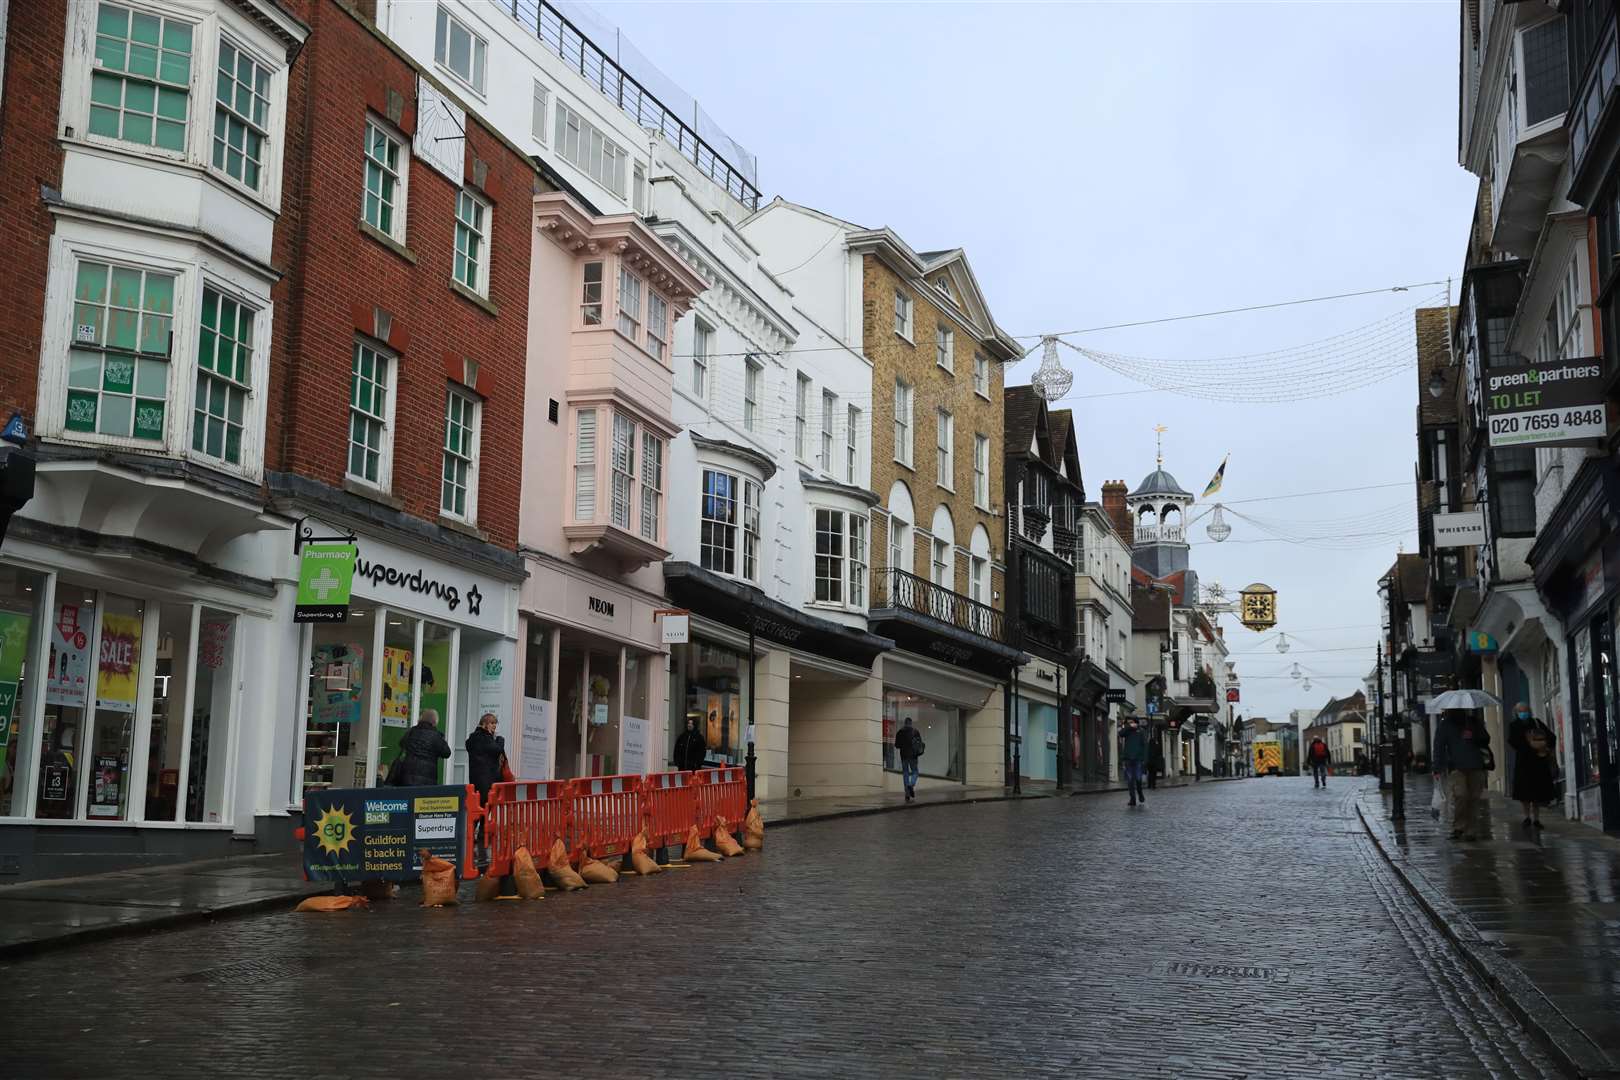 The High Street in Guildford, Surrey, looked almost deserted (Adam Davy/PA)